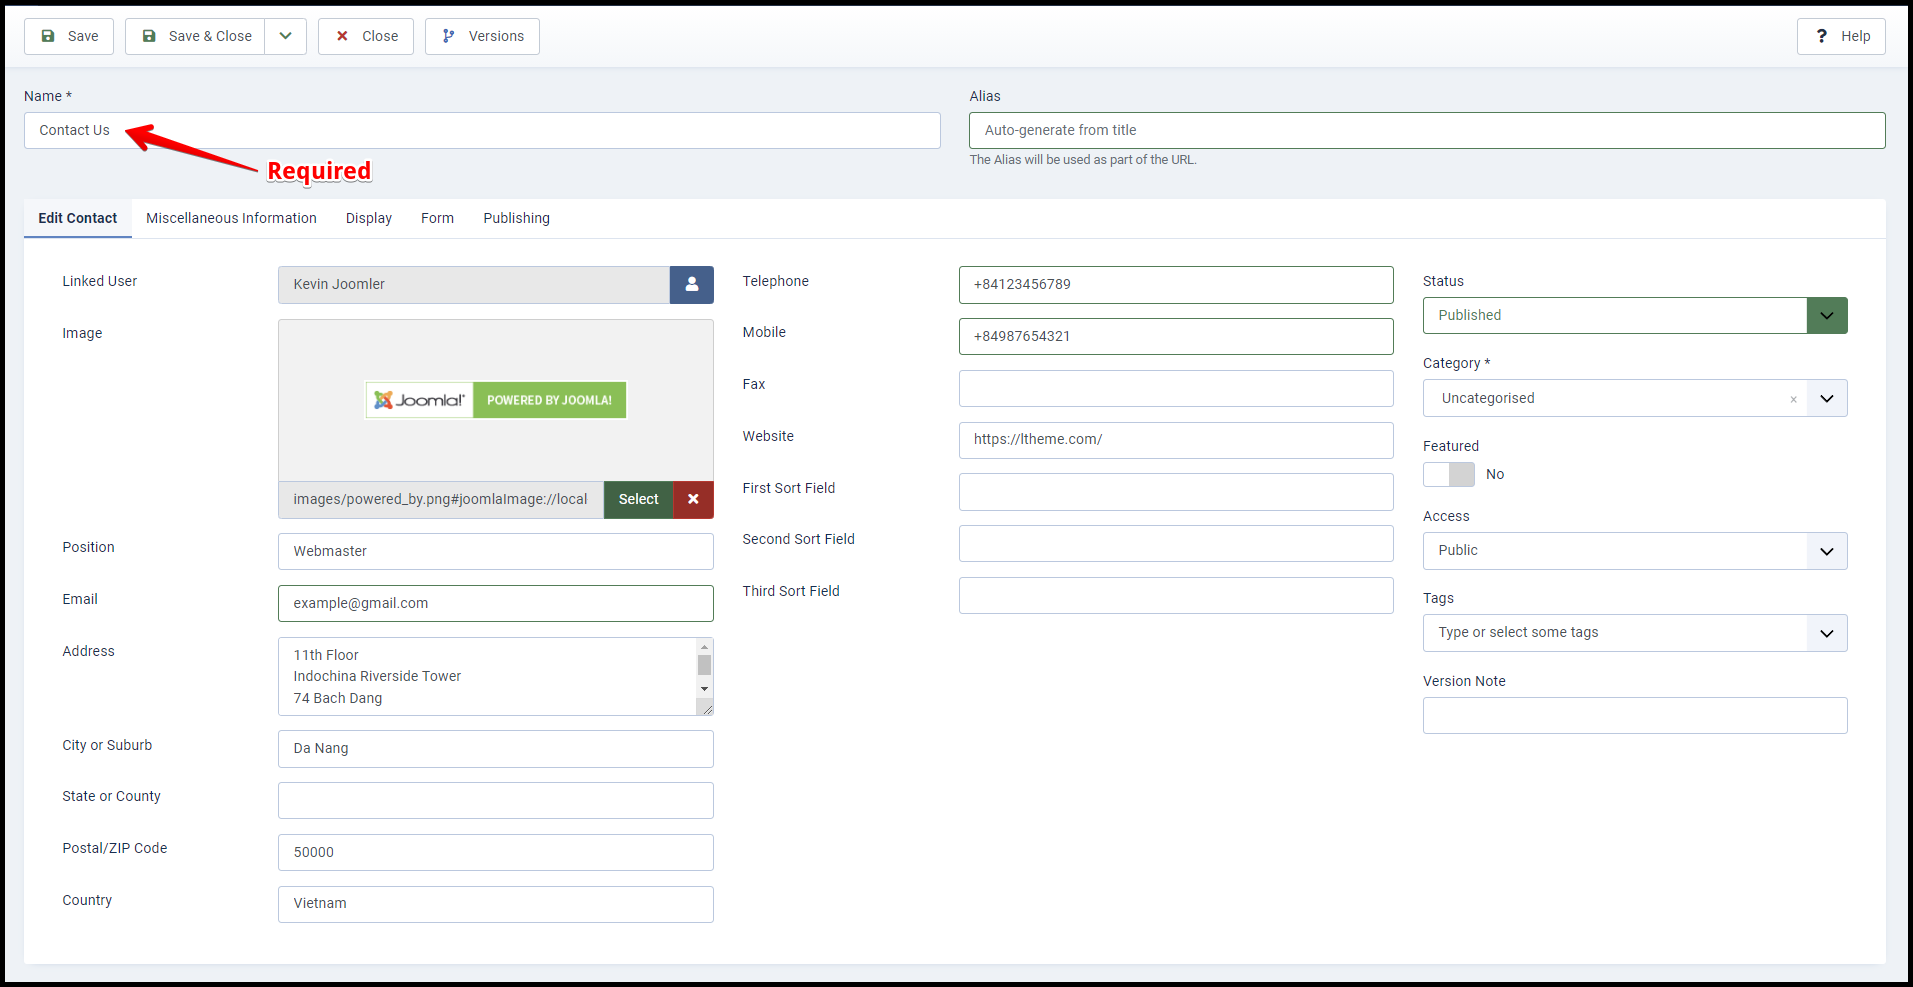 Joomla 4 - Contact Component - New Contact - Fill In Required Information